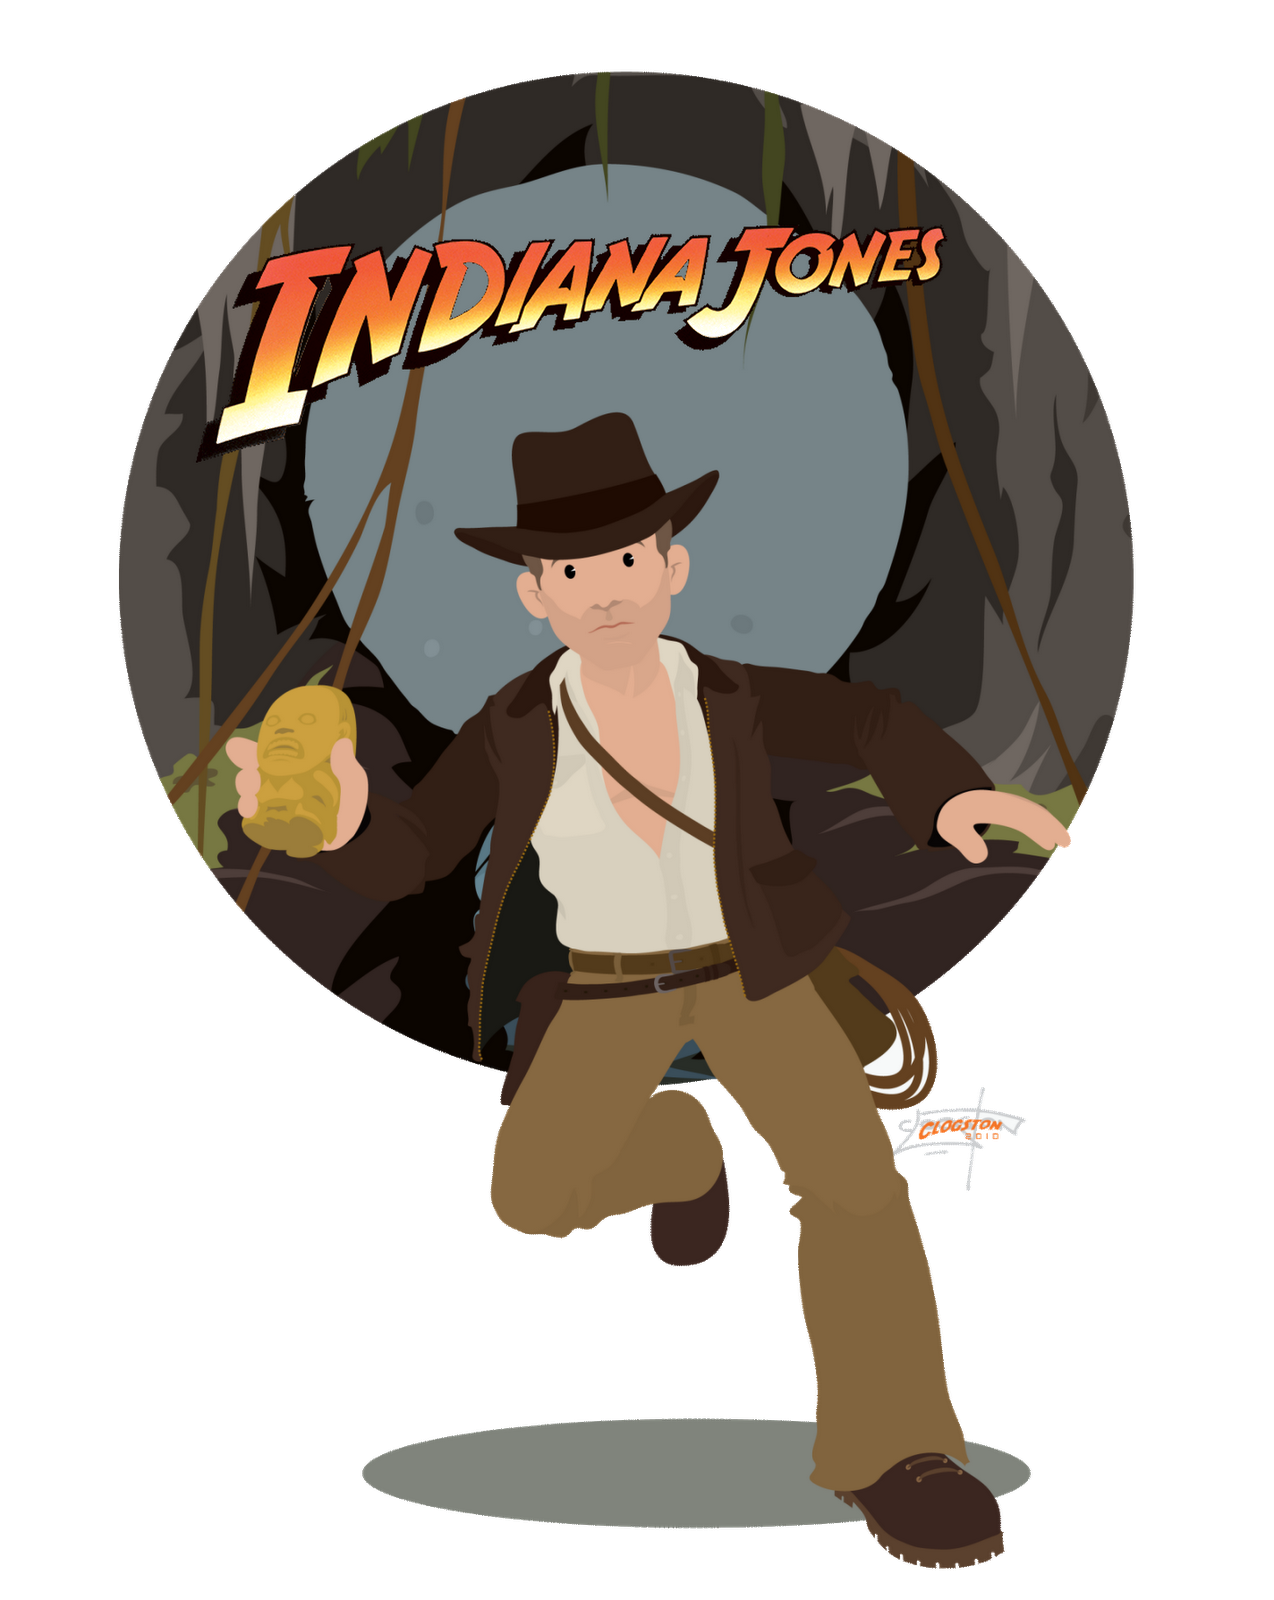 Indiana Jones: Free Party Printables. - Oh My Fiesta! in english